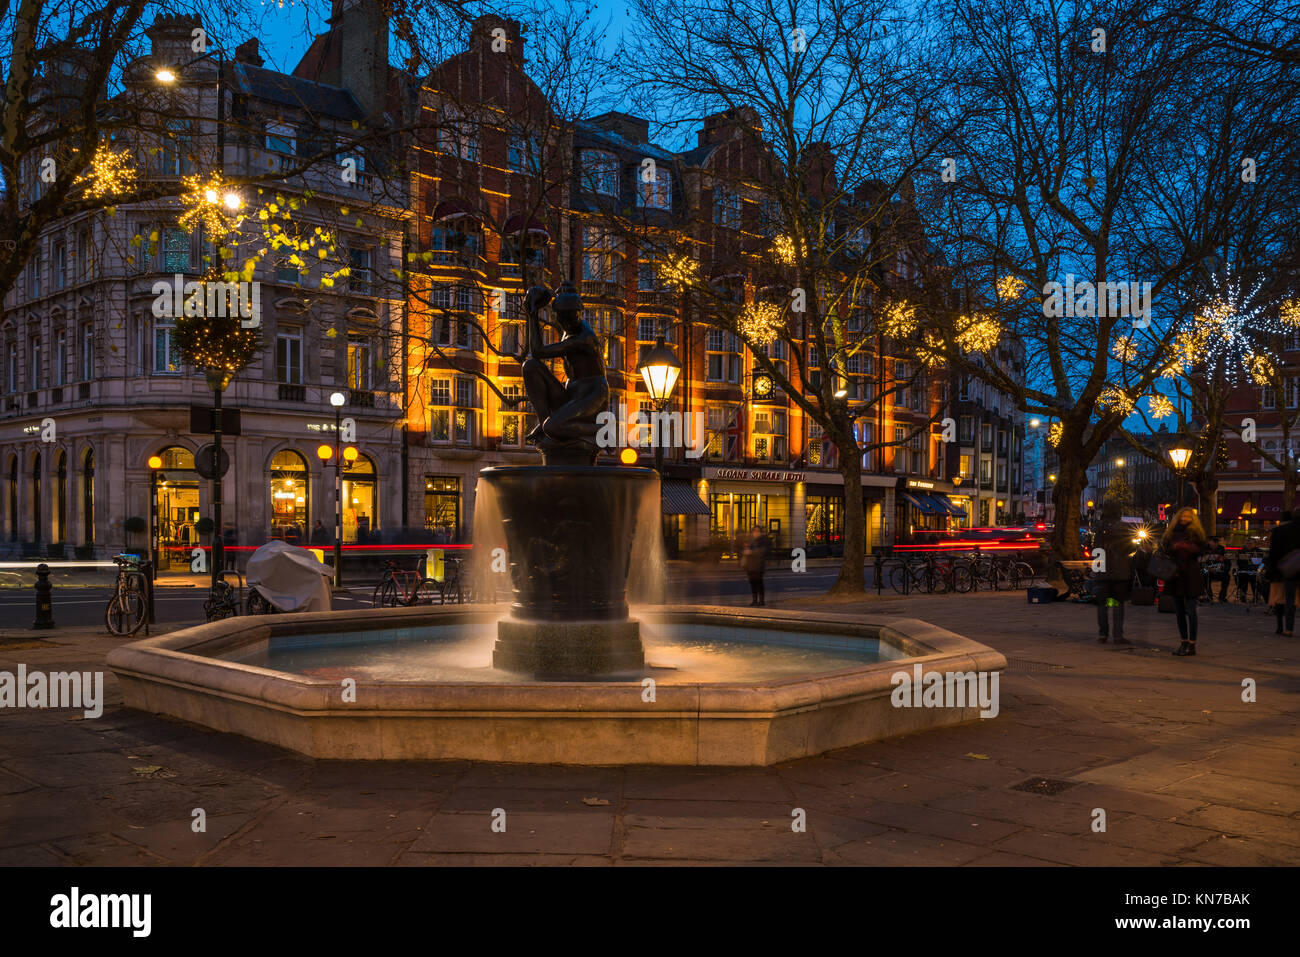 LONDON, UK - DECEMBER 09, 2017: The Venus Fountain and Christmas decorations on Sloane Square. The fountain the centre of the square was designed by s Stock Photo